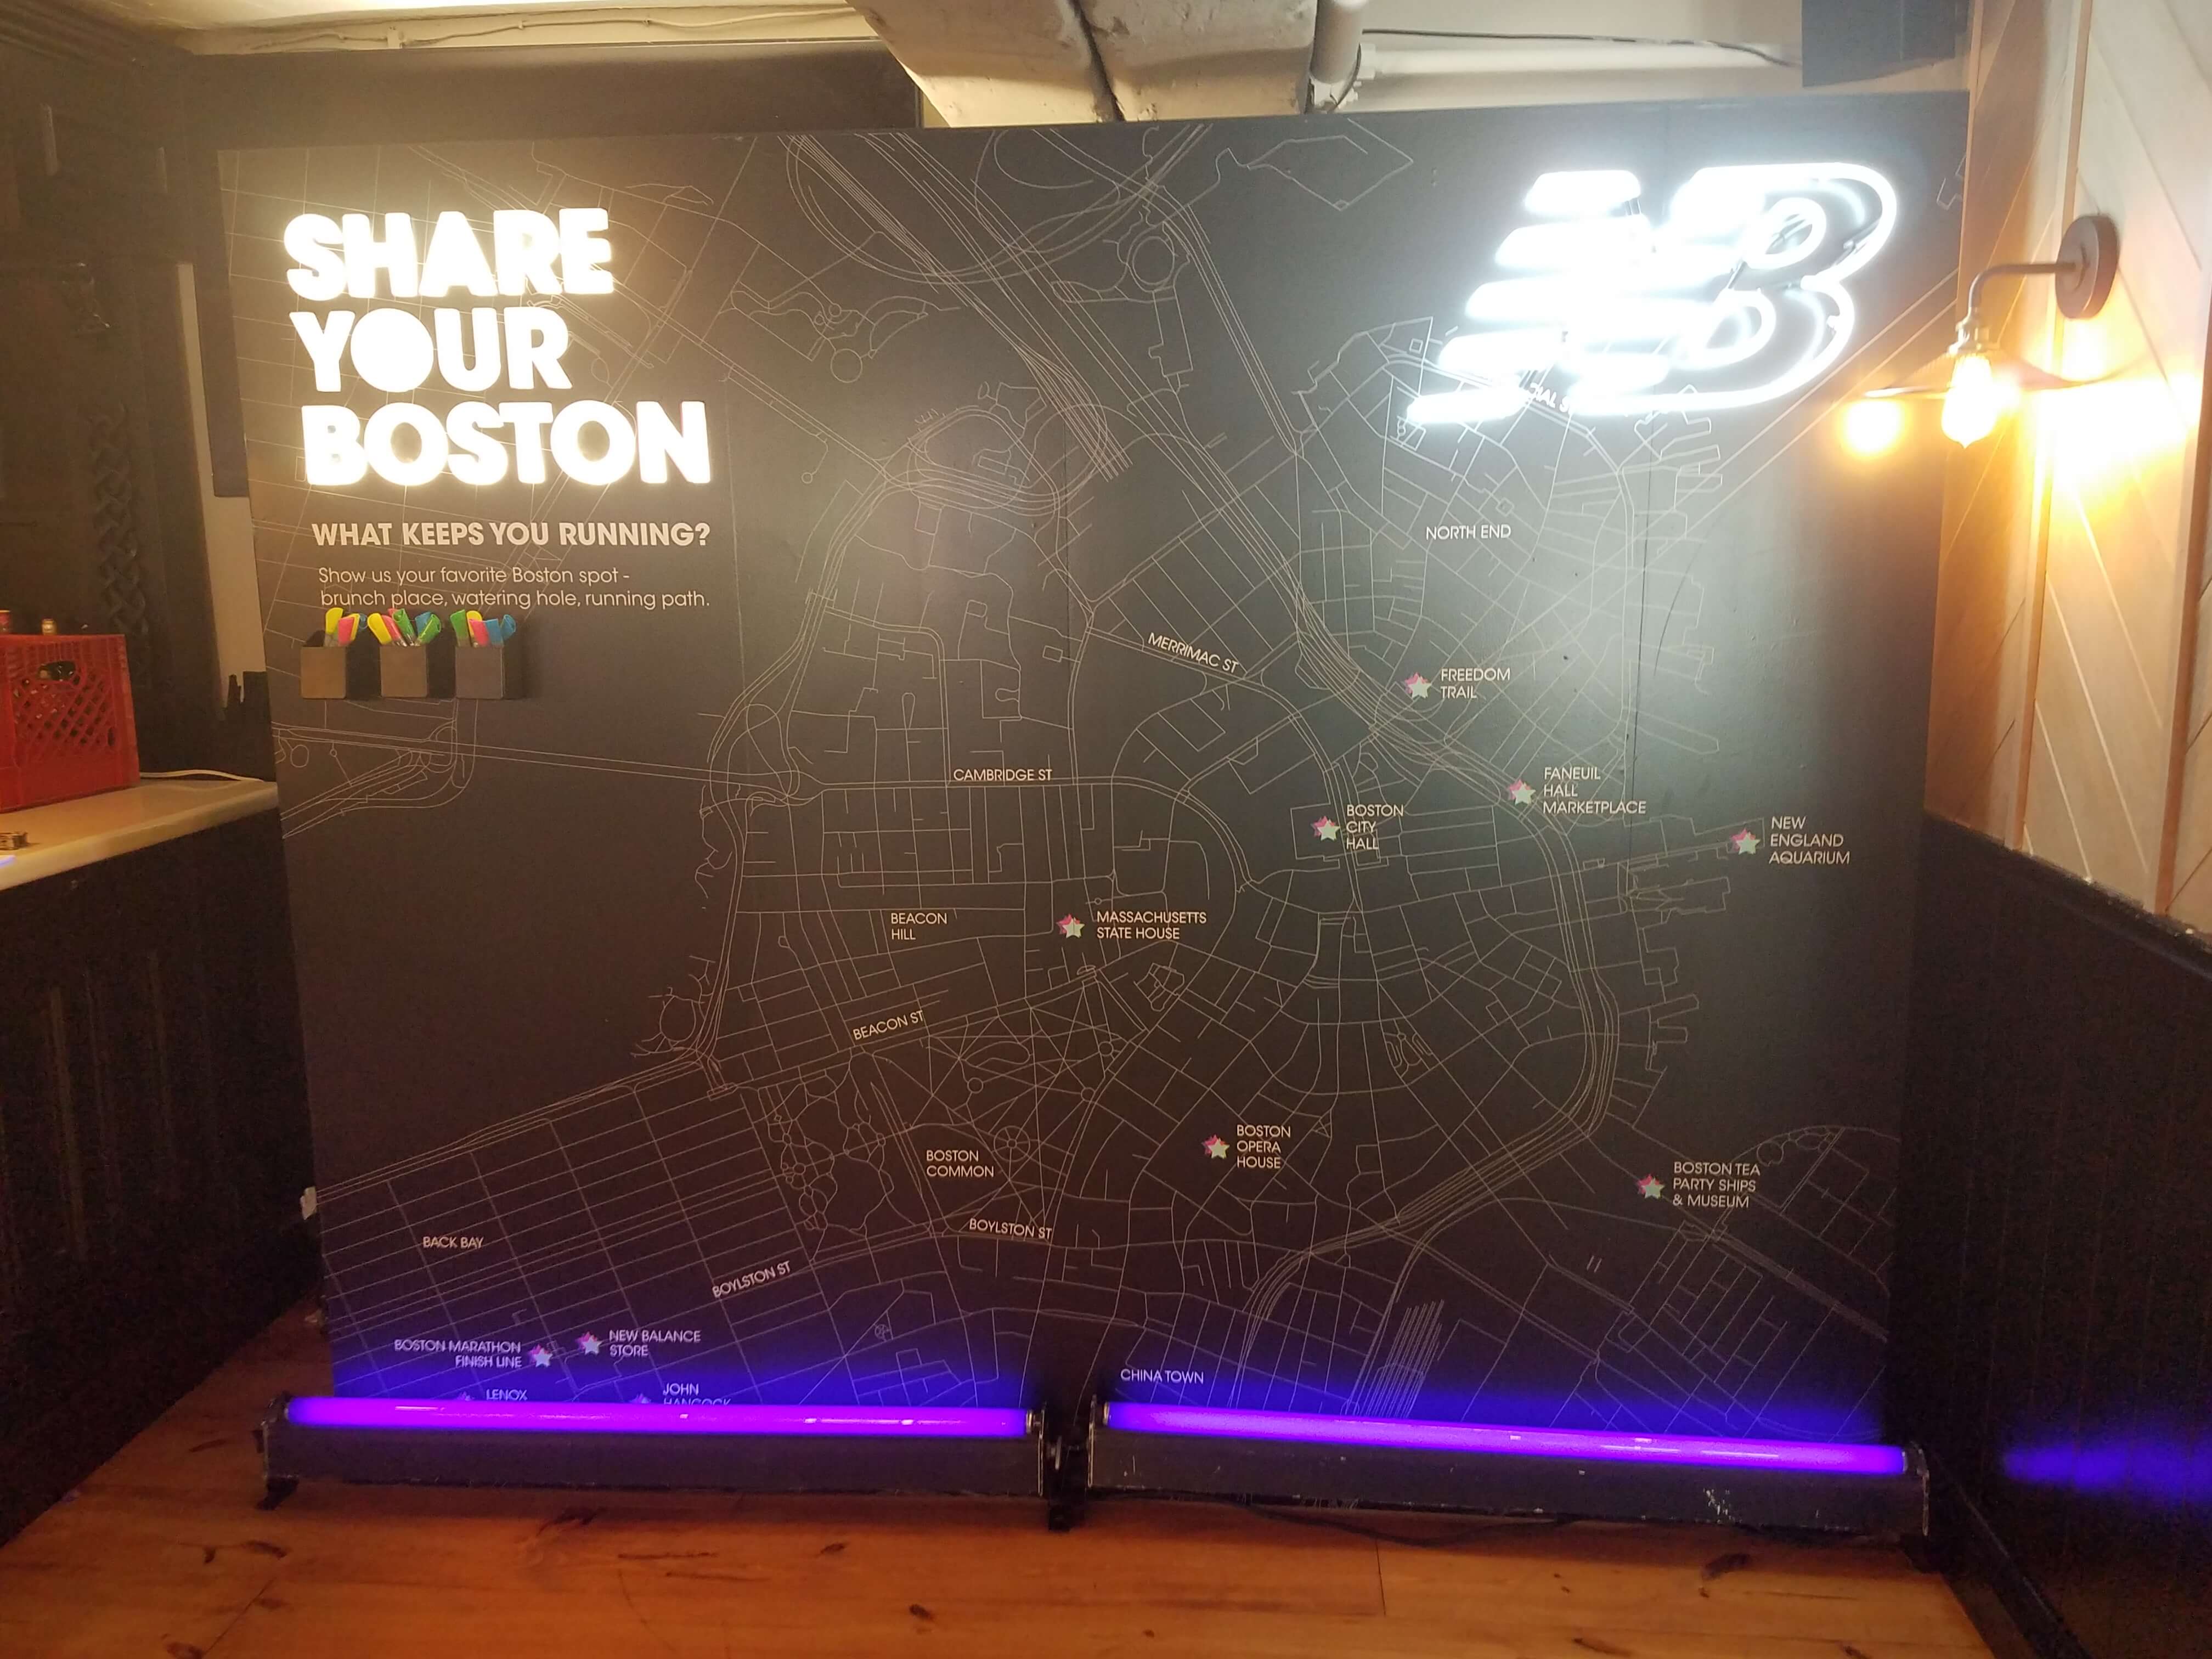 Share Your Boston Backlit Display